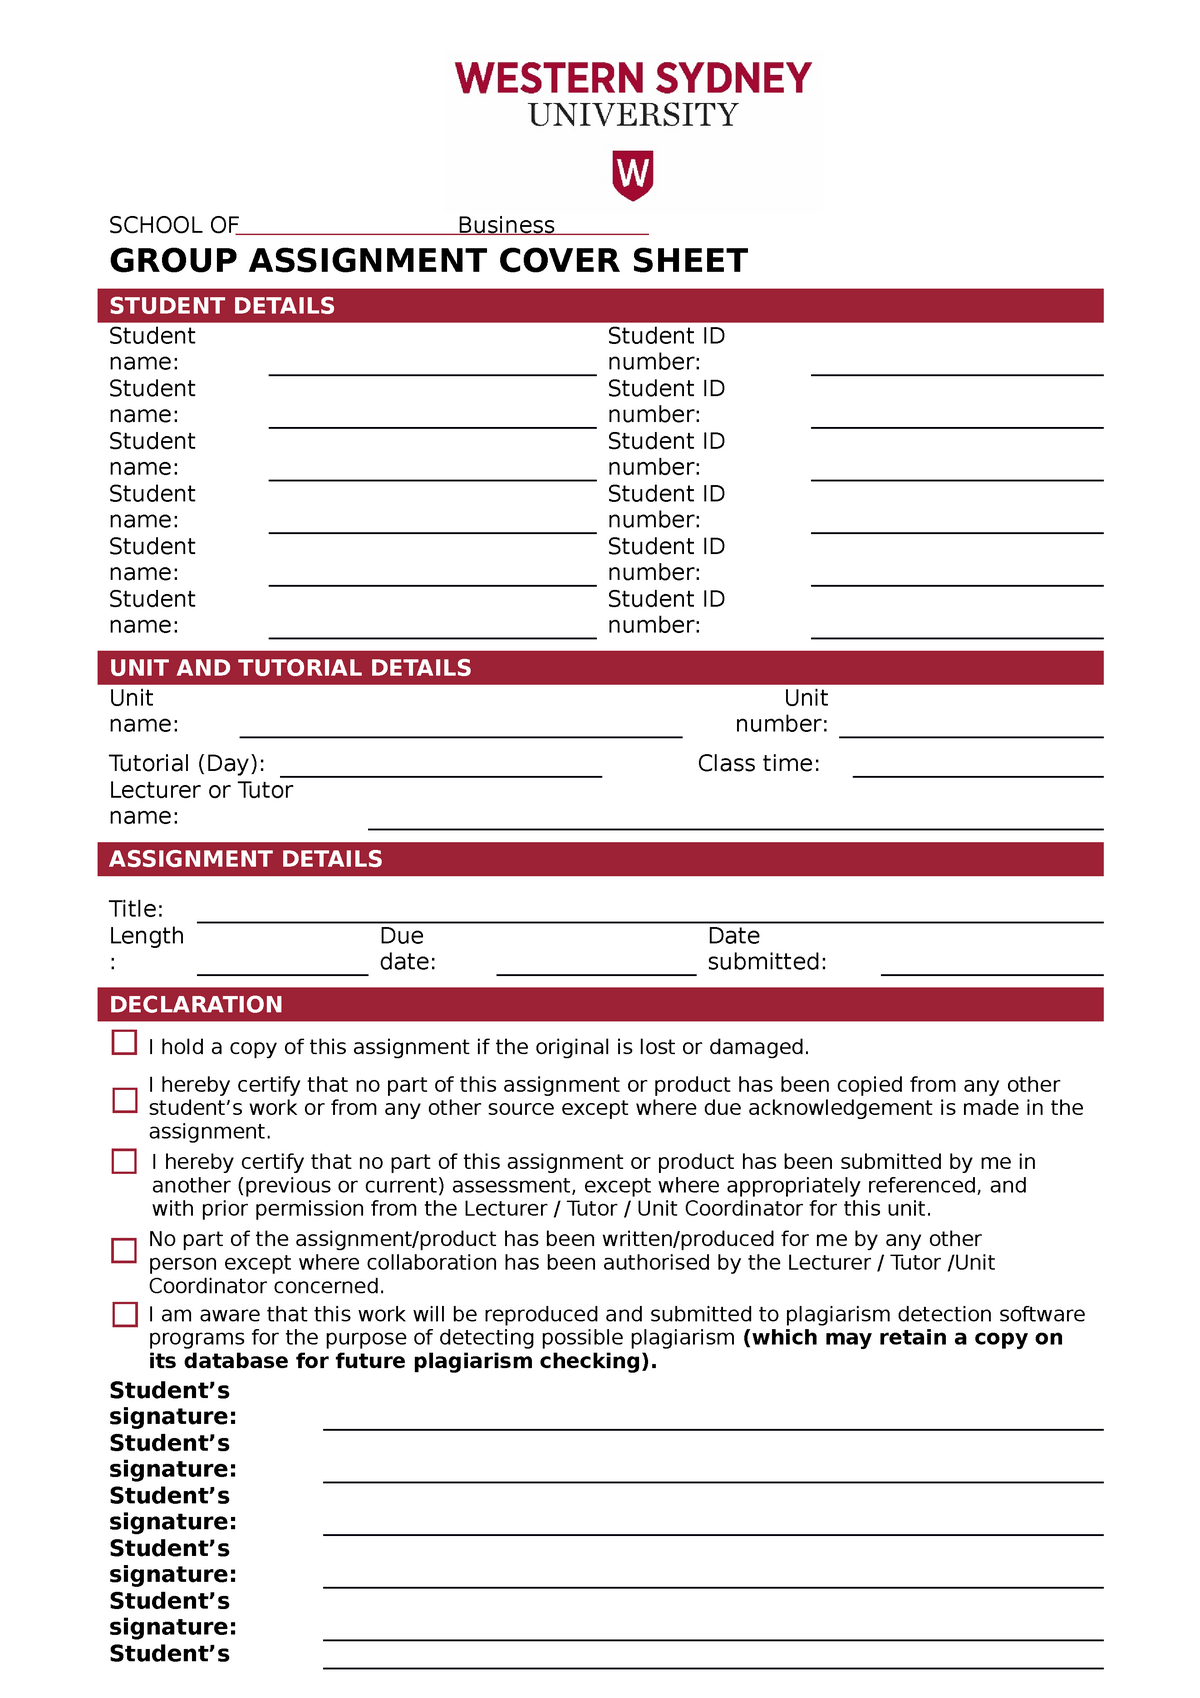 usyd assignment cover sheet